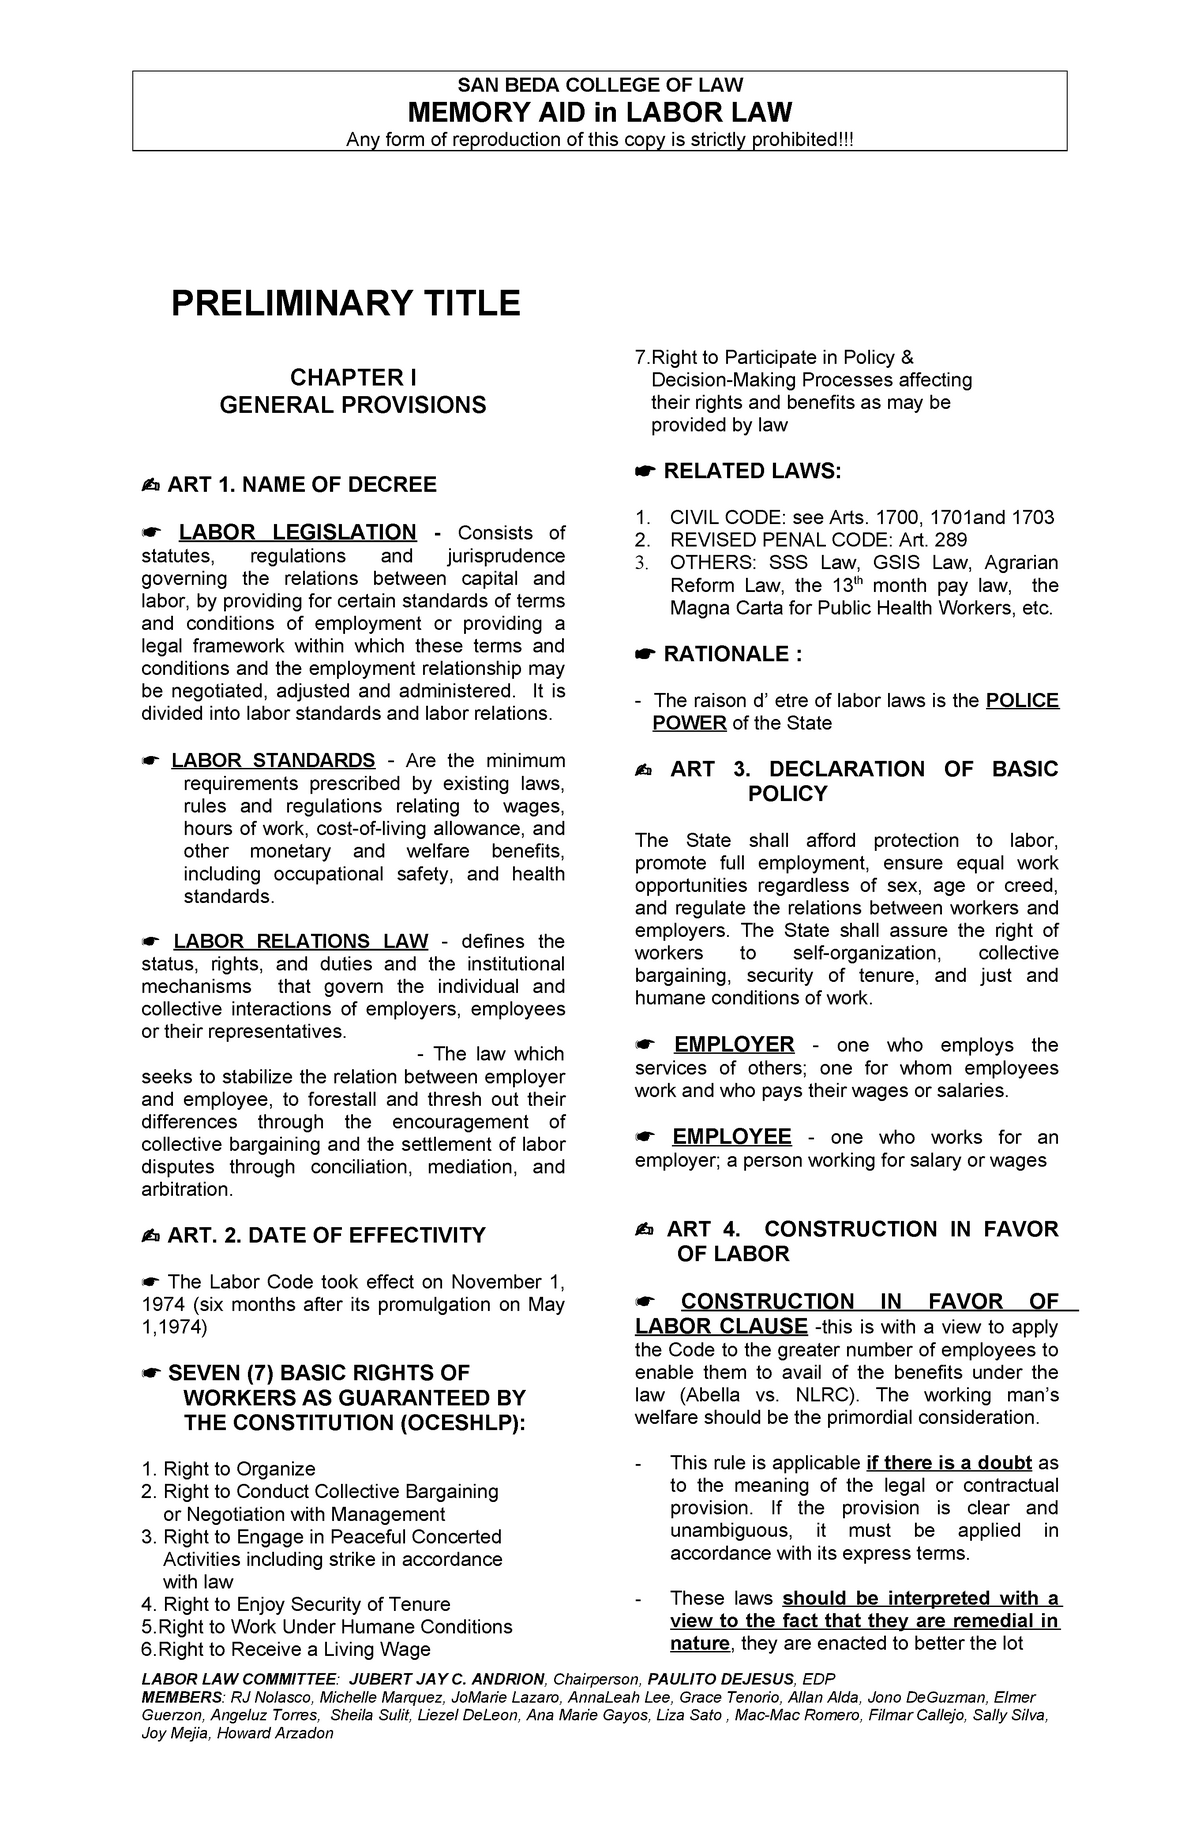 Labor Code of the Philippines Lecture Note SAN BEDA COLLEGE OF LAW